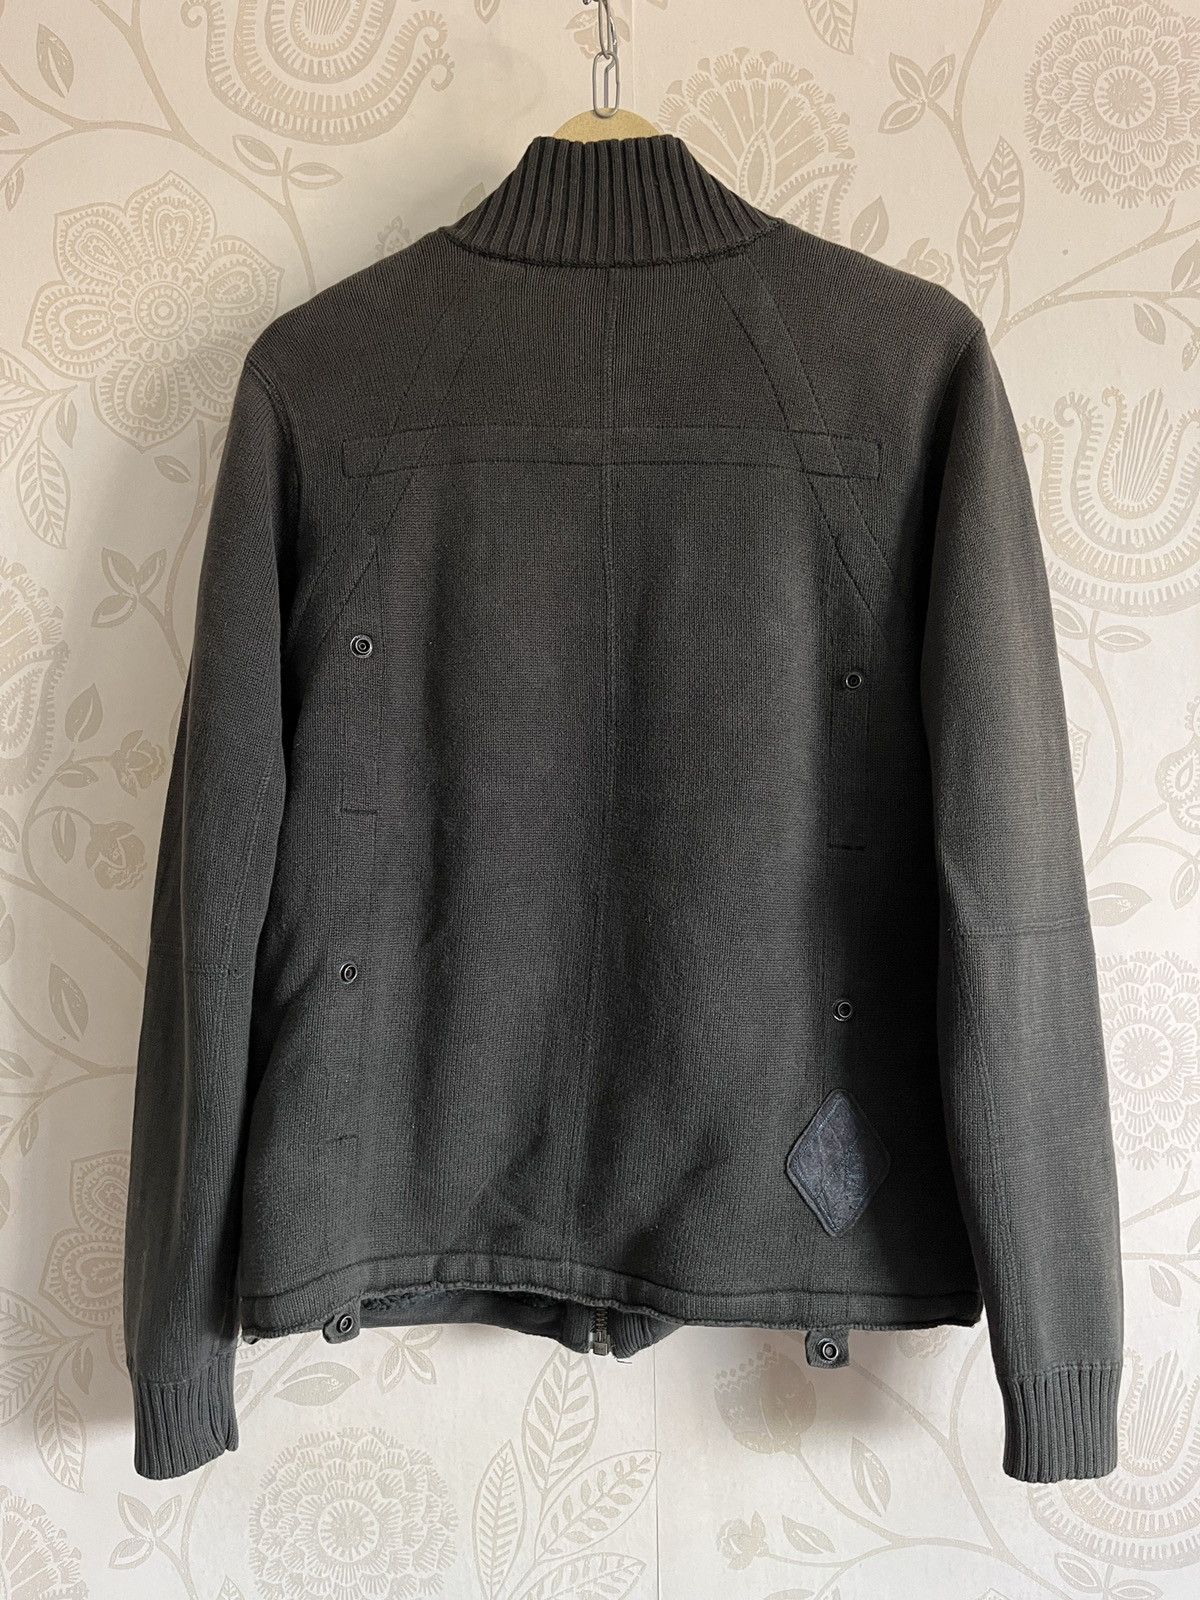 Vintage - G Star Raw Army Tactical Knitwear Wool Sweater Jacket - 17